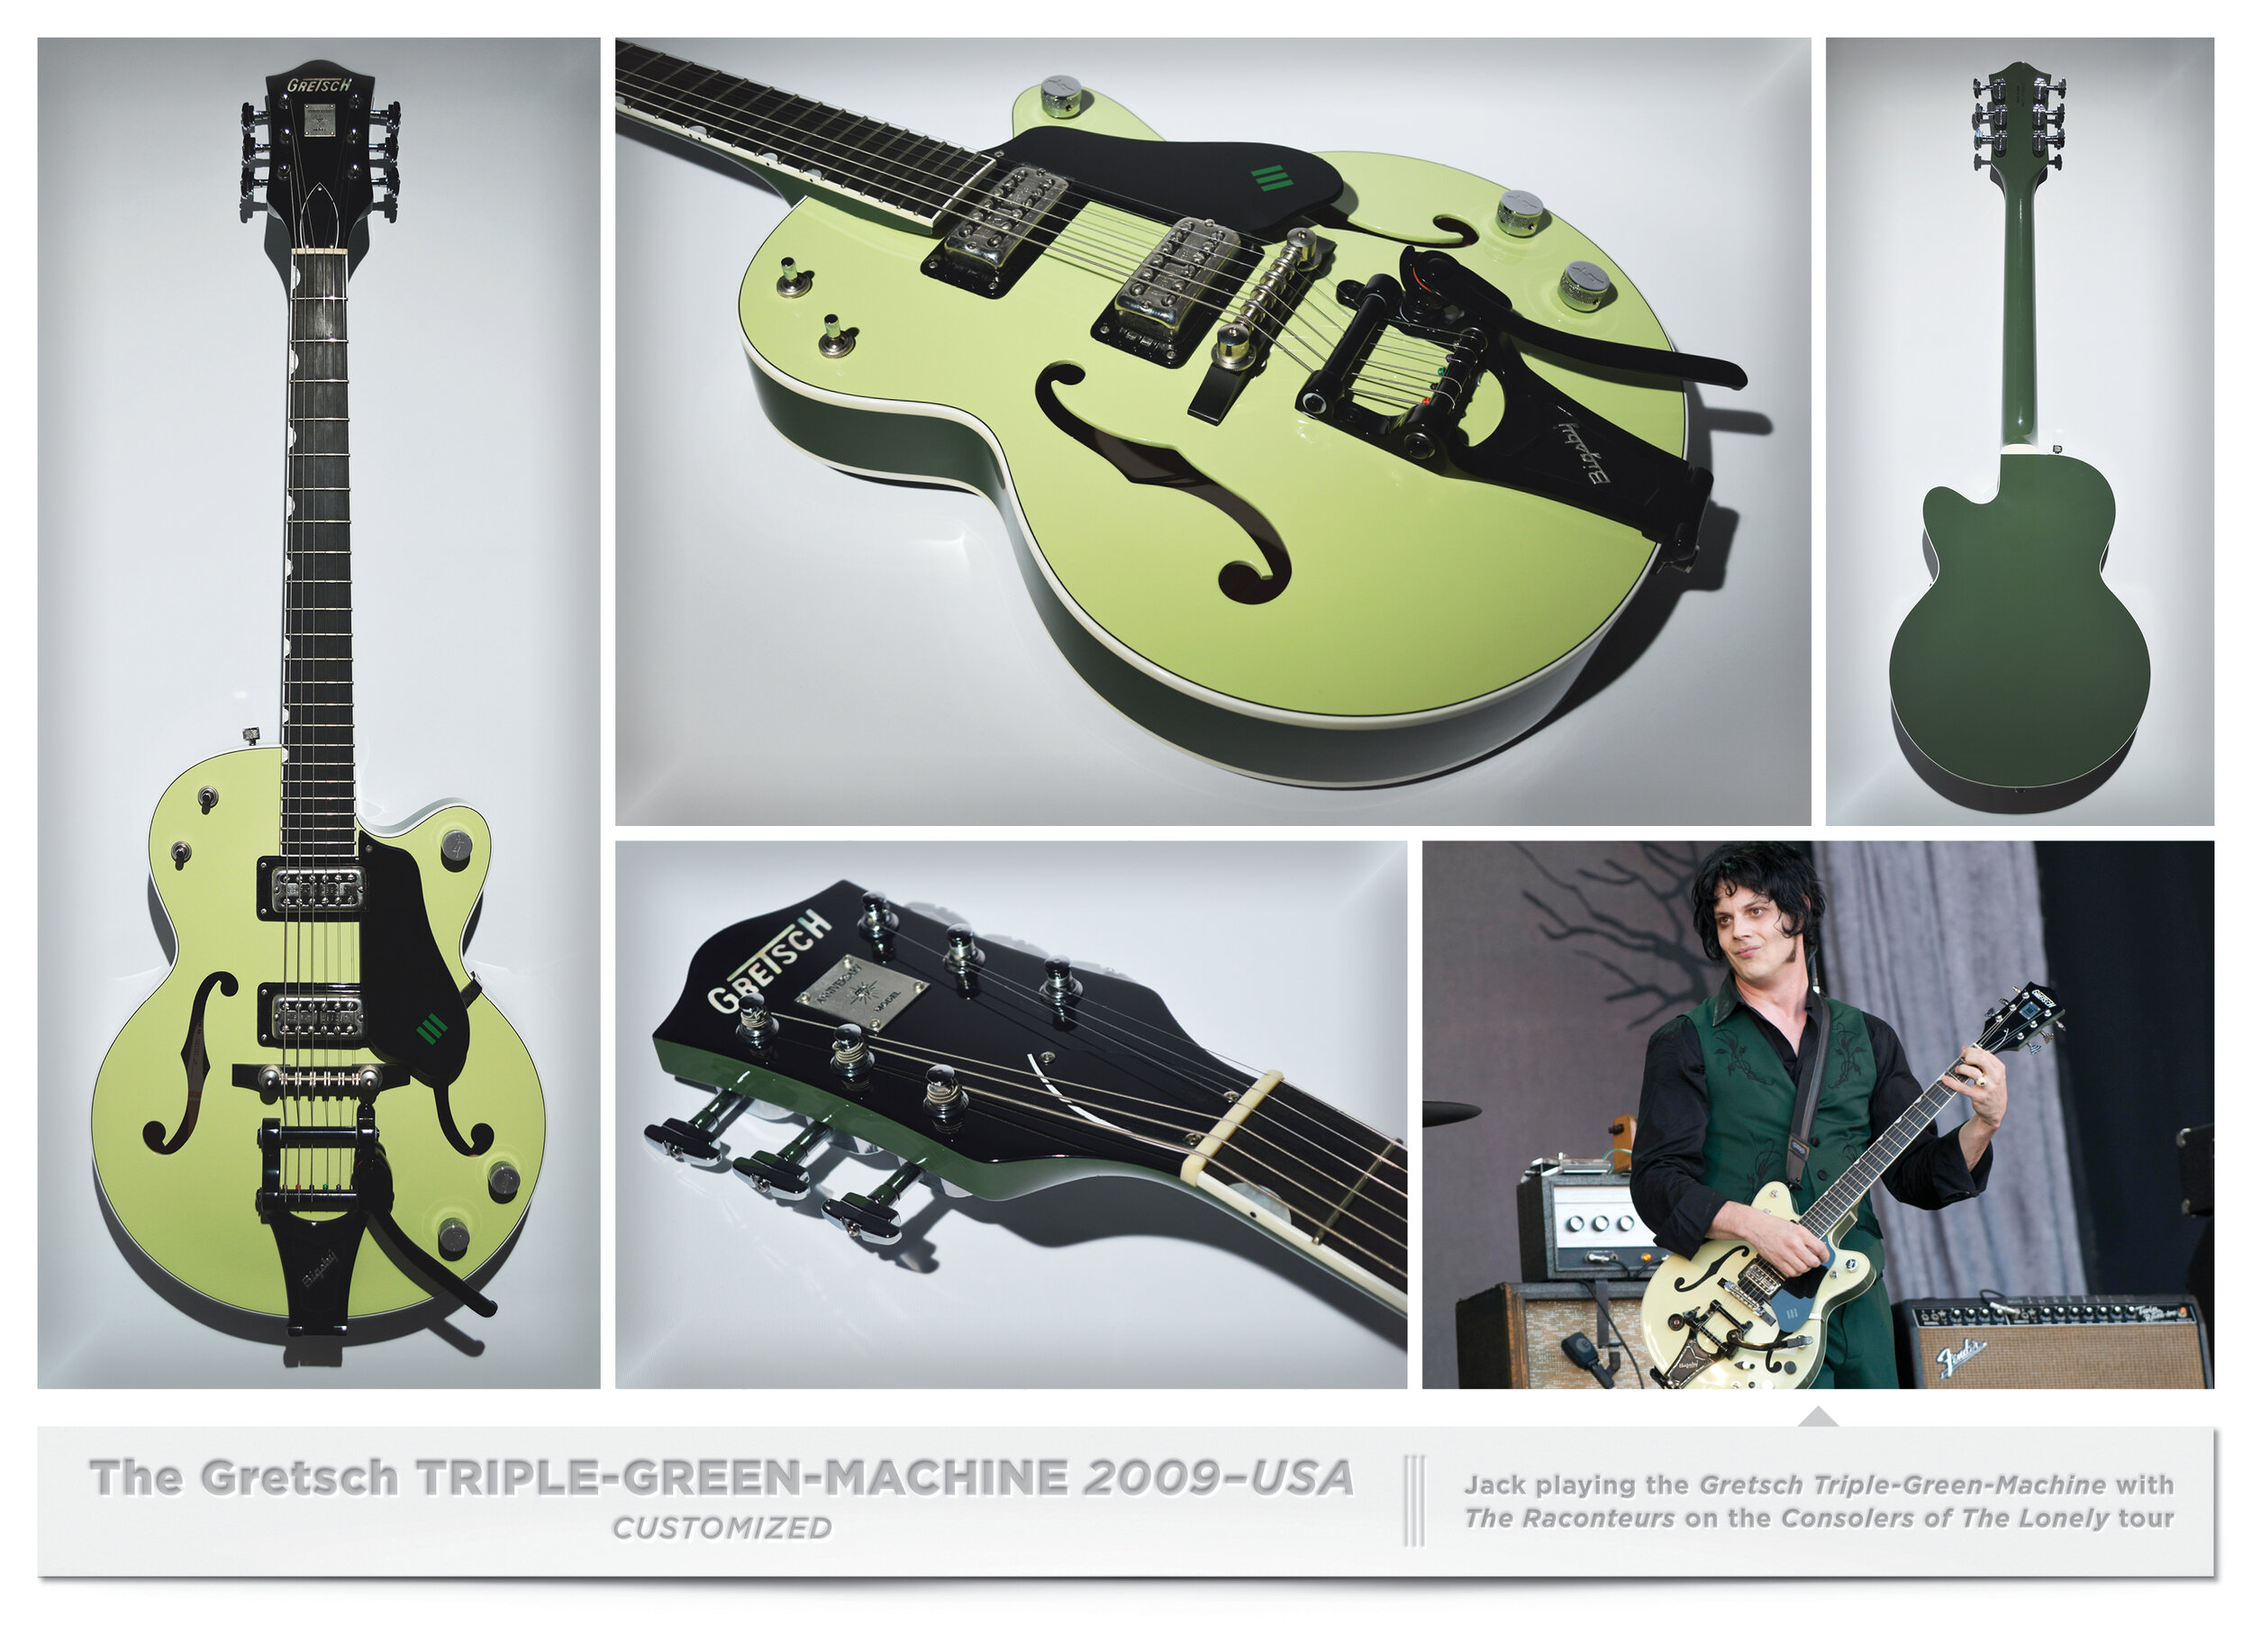 8 The Gretsch TRIPLE-GREEN-MACHINE 2009–USA THE JACK WHITE GUITAR COLLECTION FINAL LAYOUT8.jpg